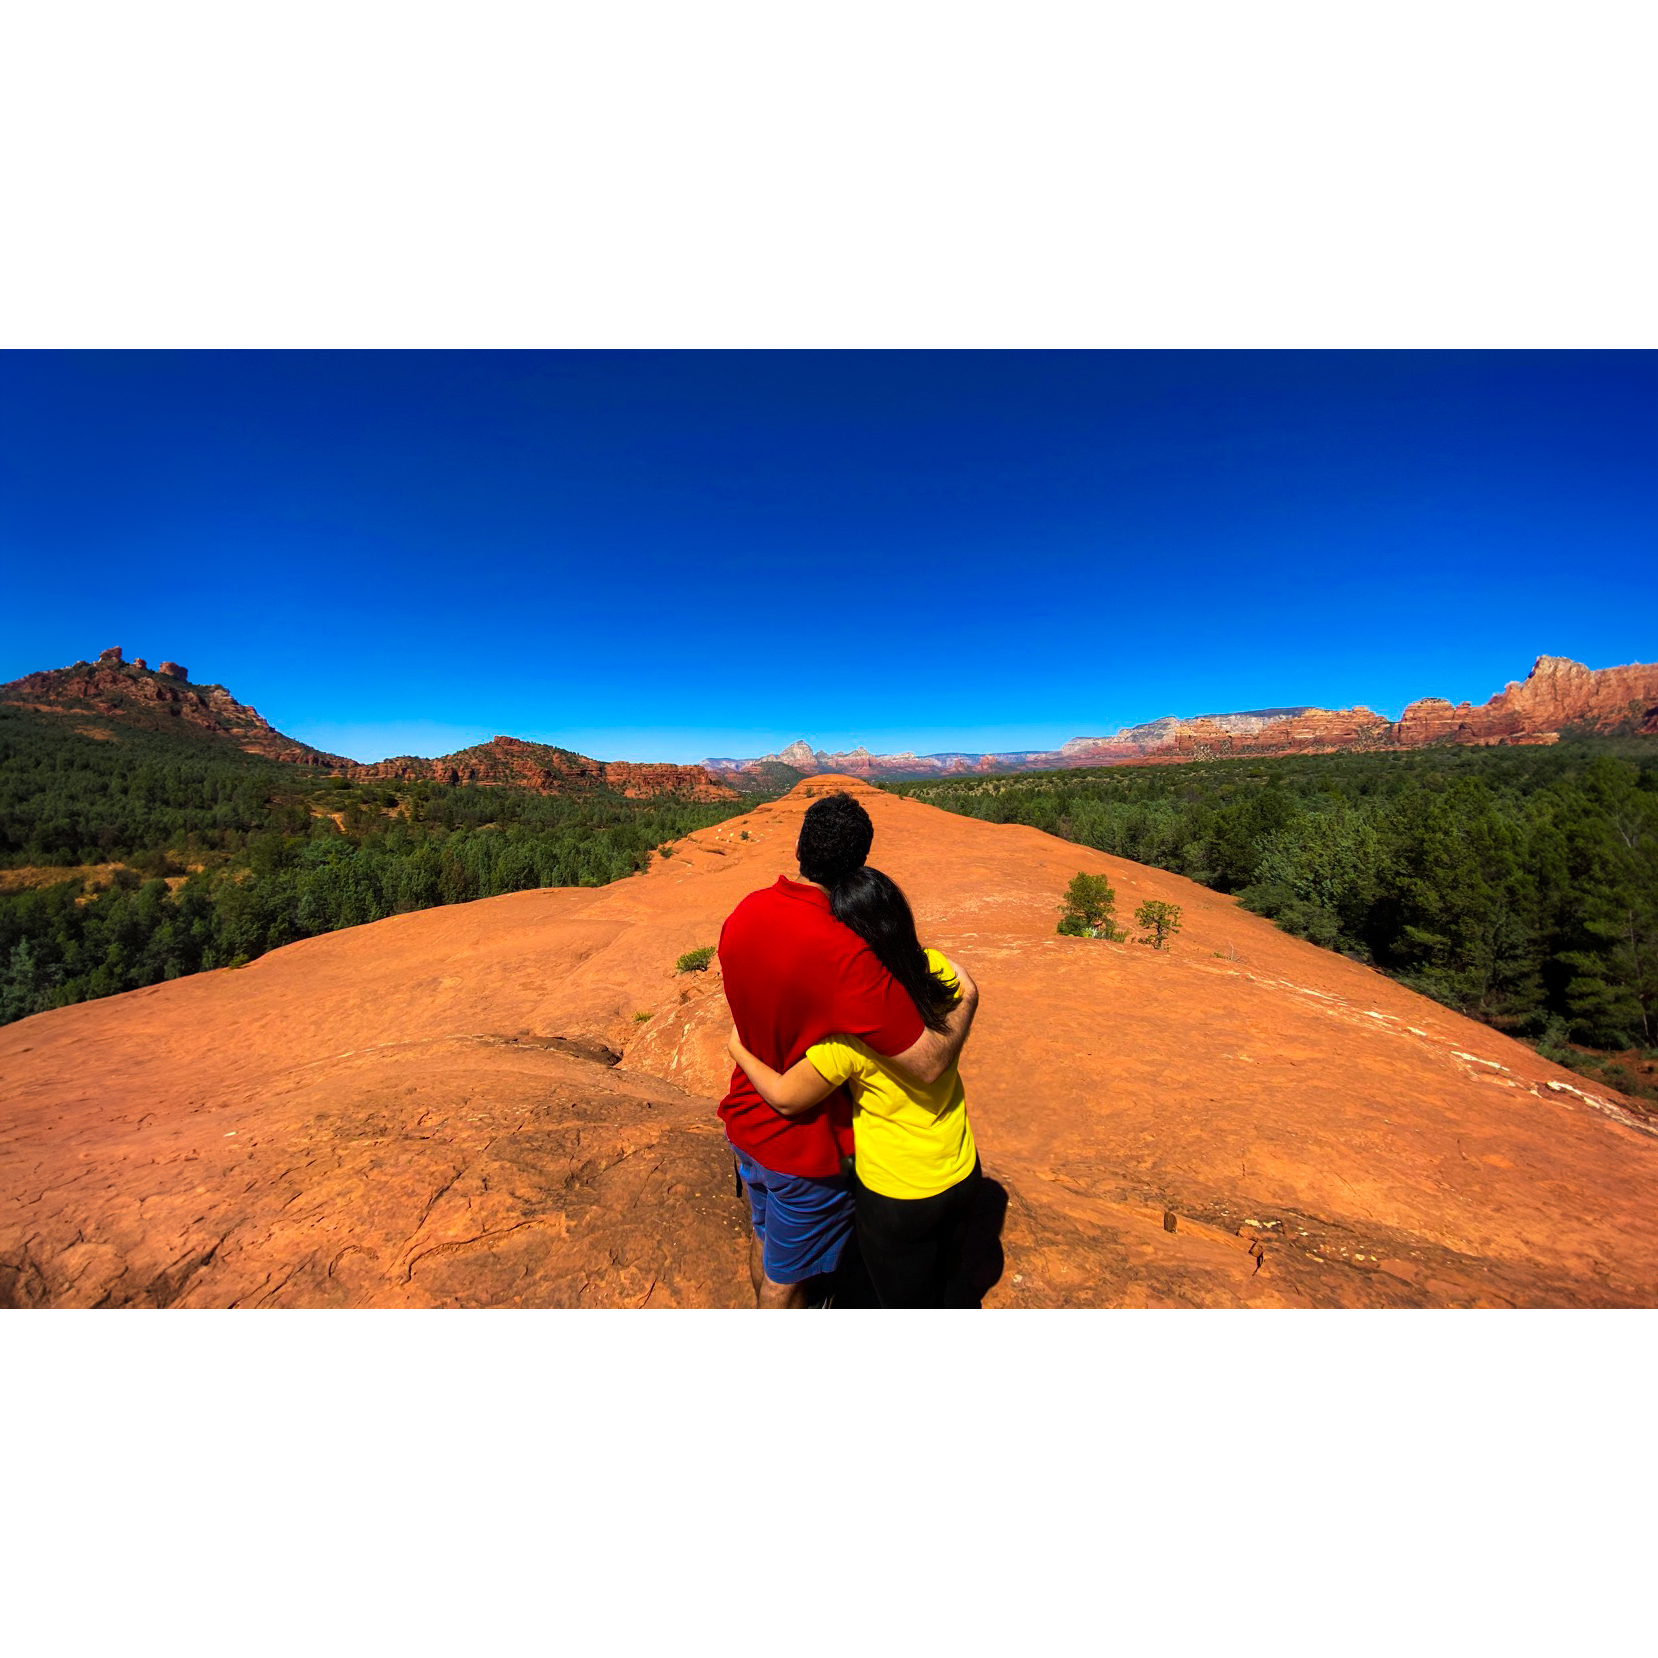 Hugging each other the first time in Sedona (overlooking an "infinity" rock)